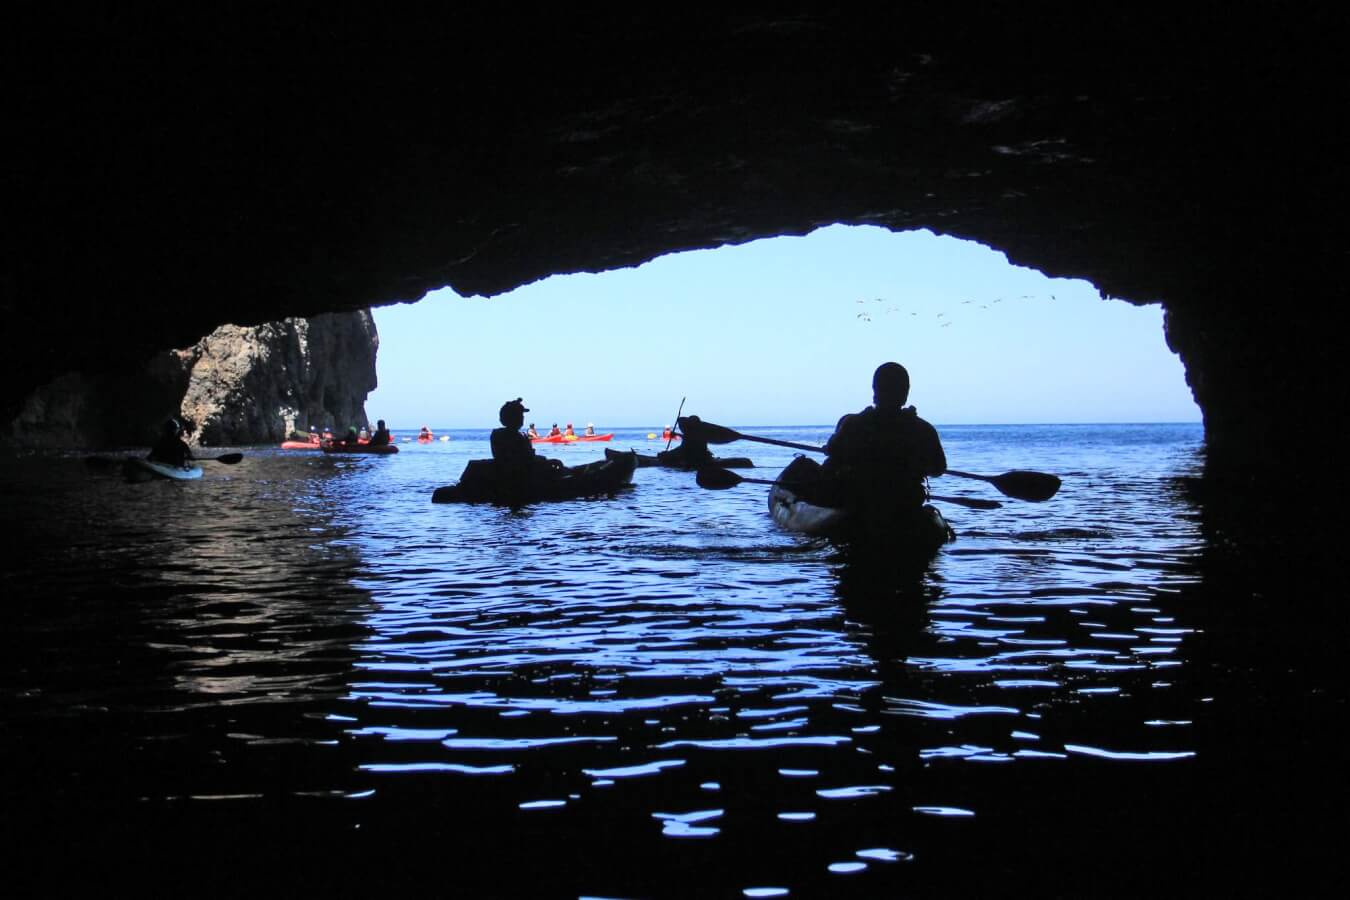 kayakers at the painted caves off the islands